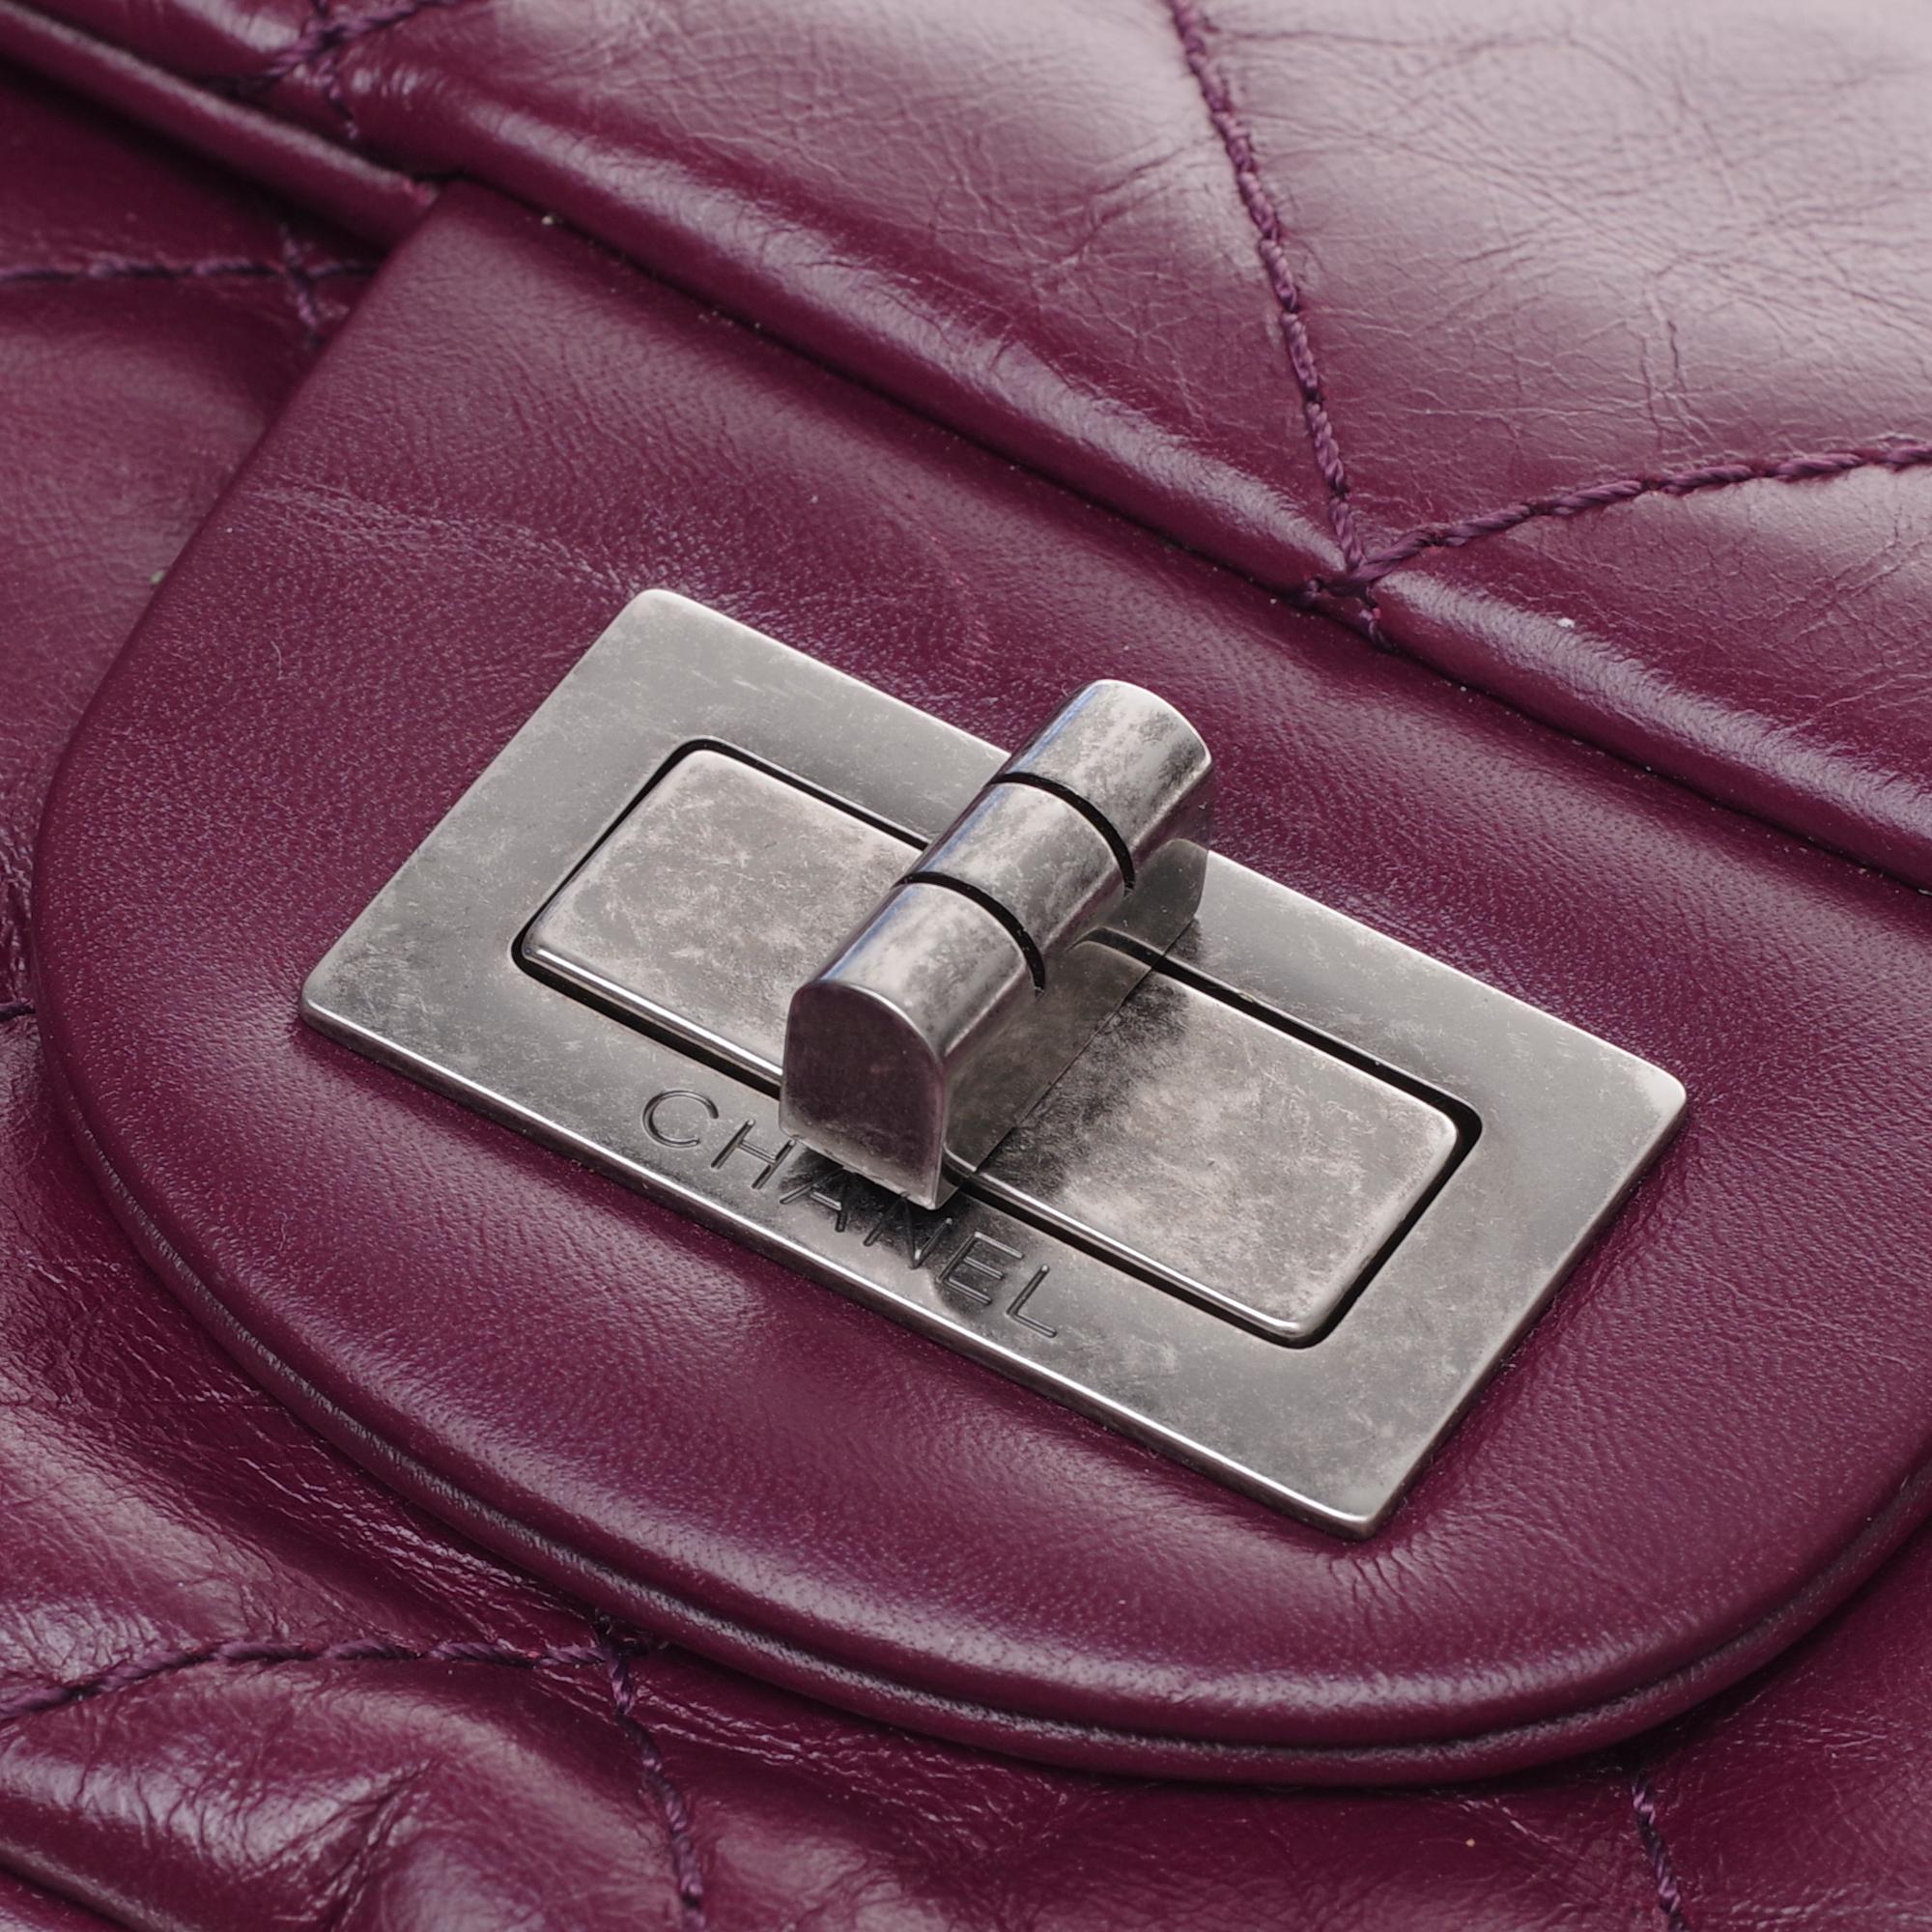 Amazing Chanel 2.55 Reissue handbag in plum quilted leather 2